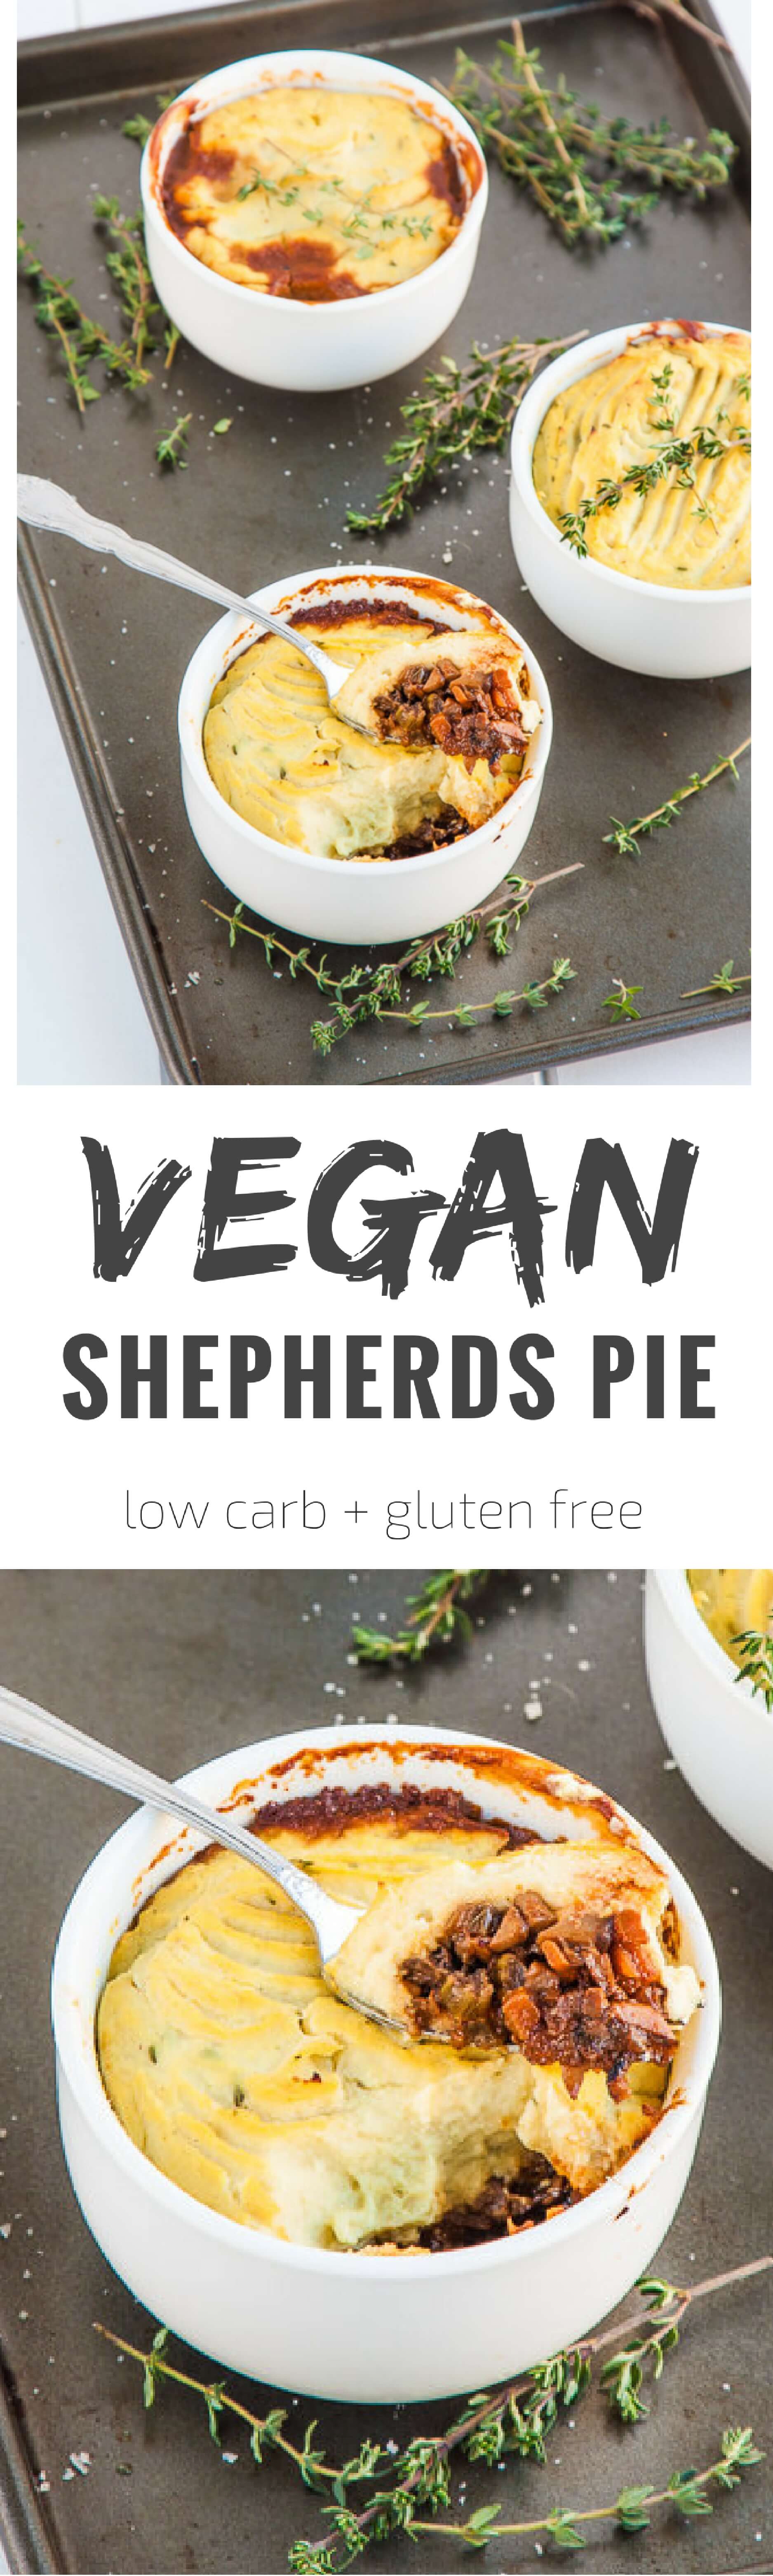 The British classic gets a makeover with mushrooms and cauliflower. This is a low carb vegan shepherds pie that the whole family will love!